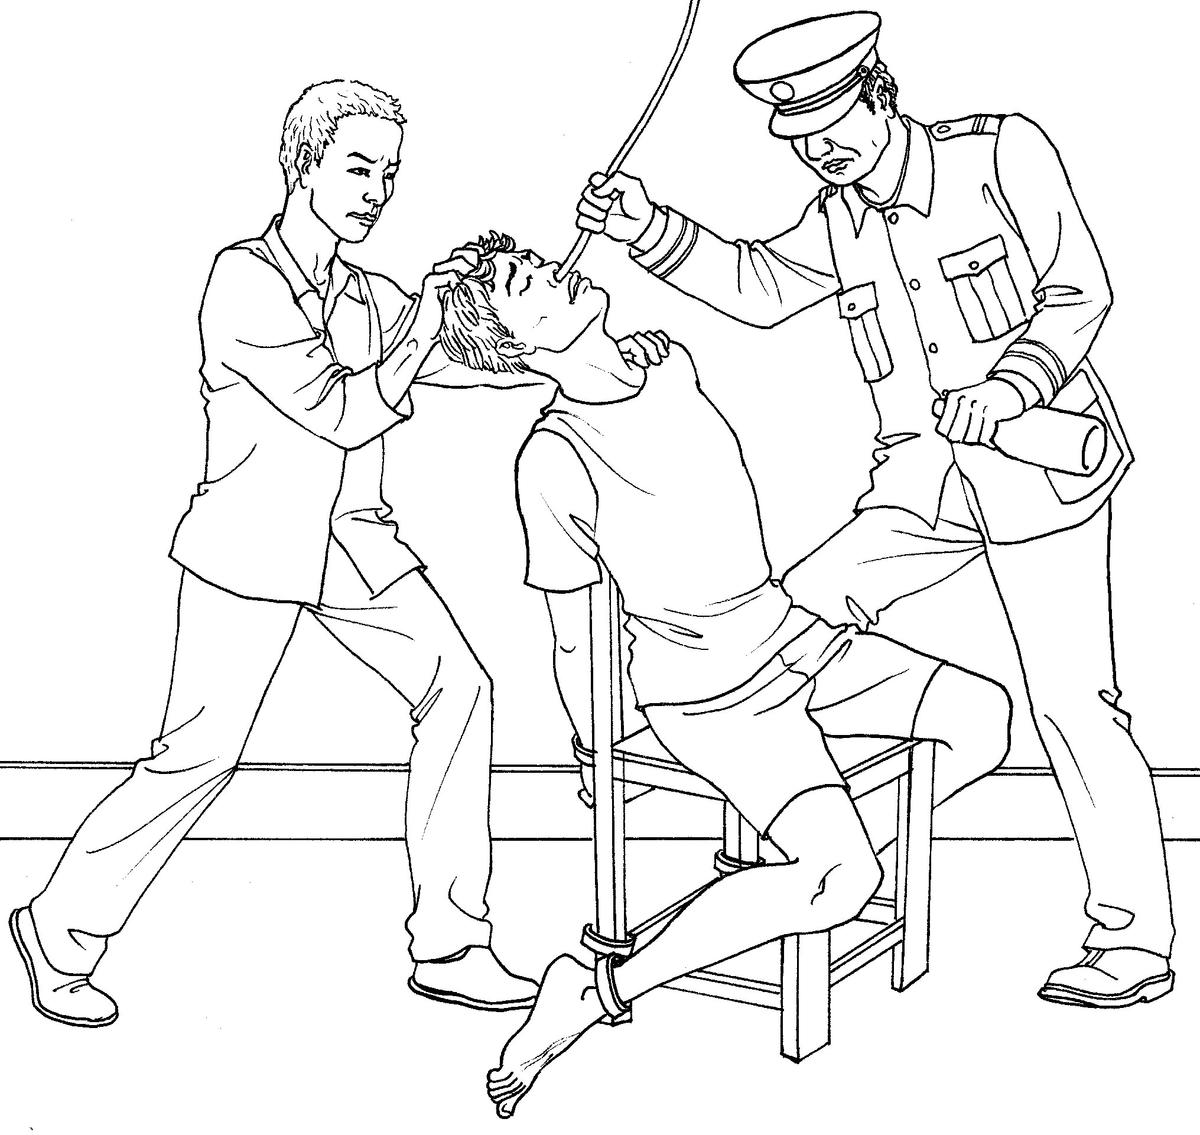 An illustration of force-feeding, one of the torture methods used in Chinese labor camps and prisons. (Minghui)